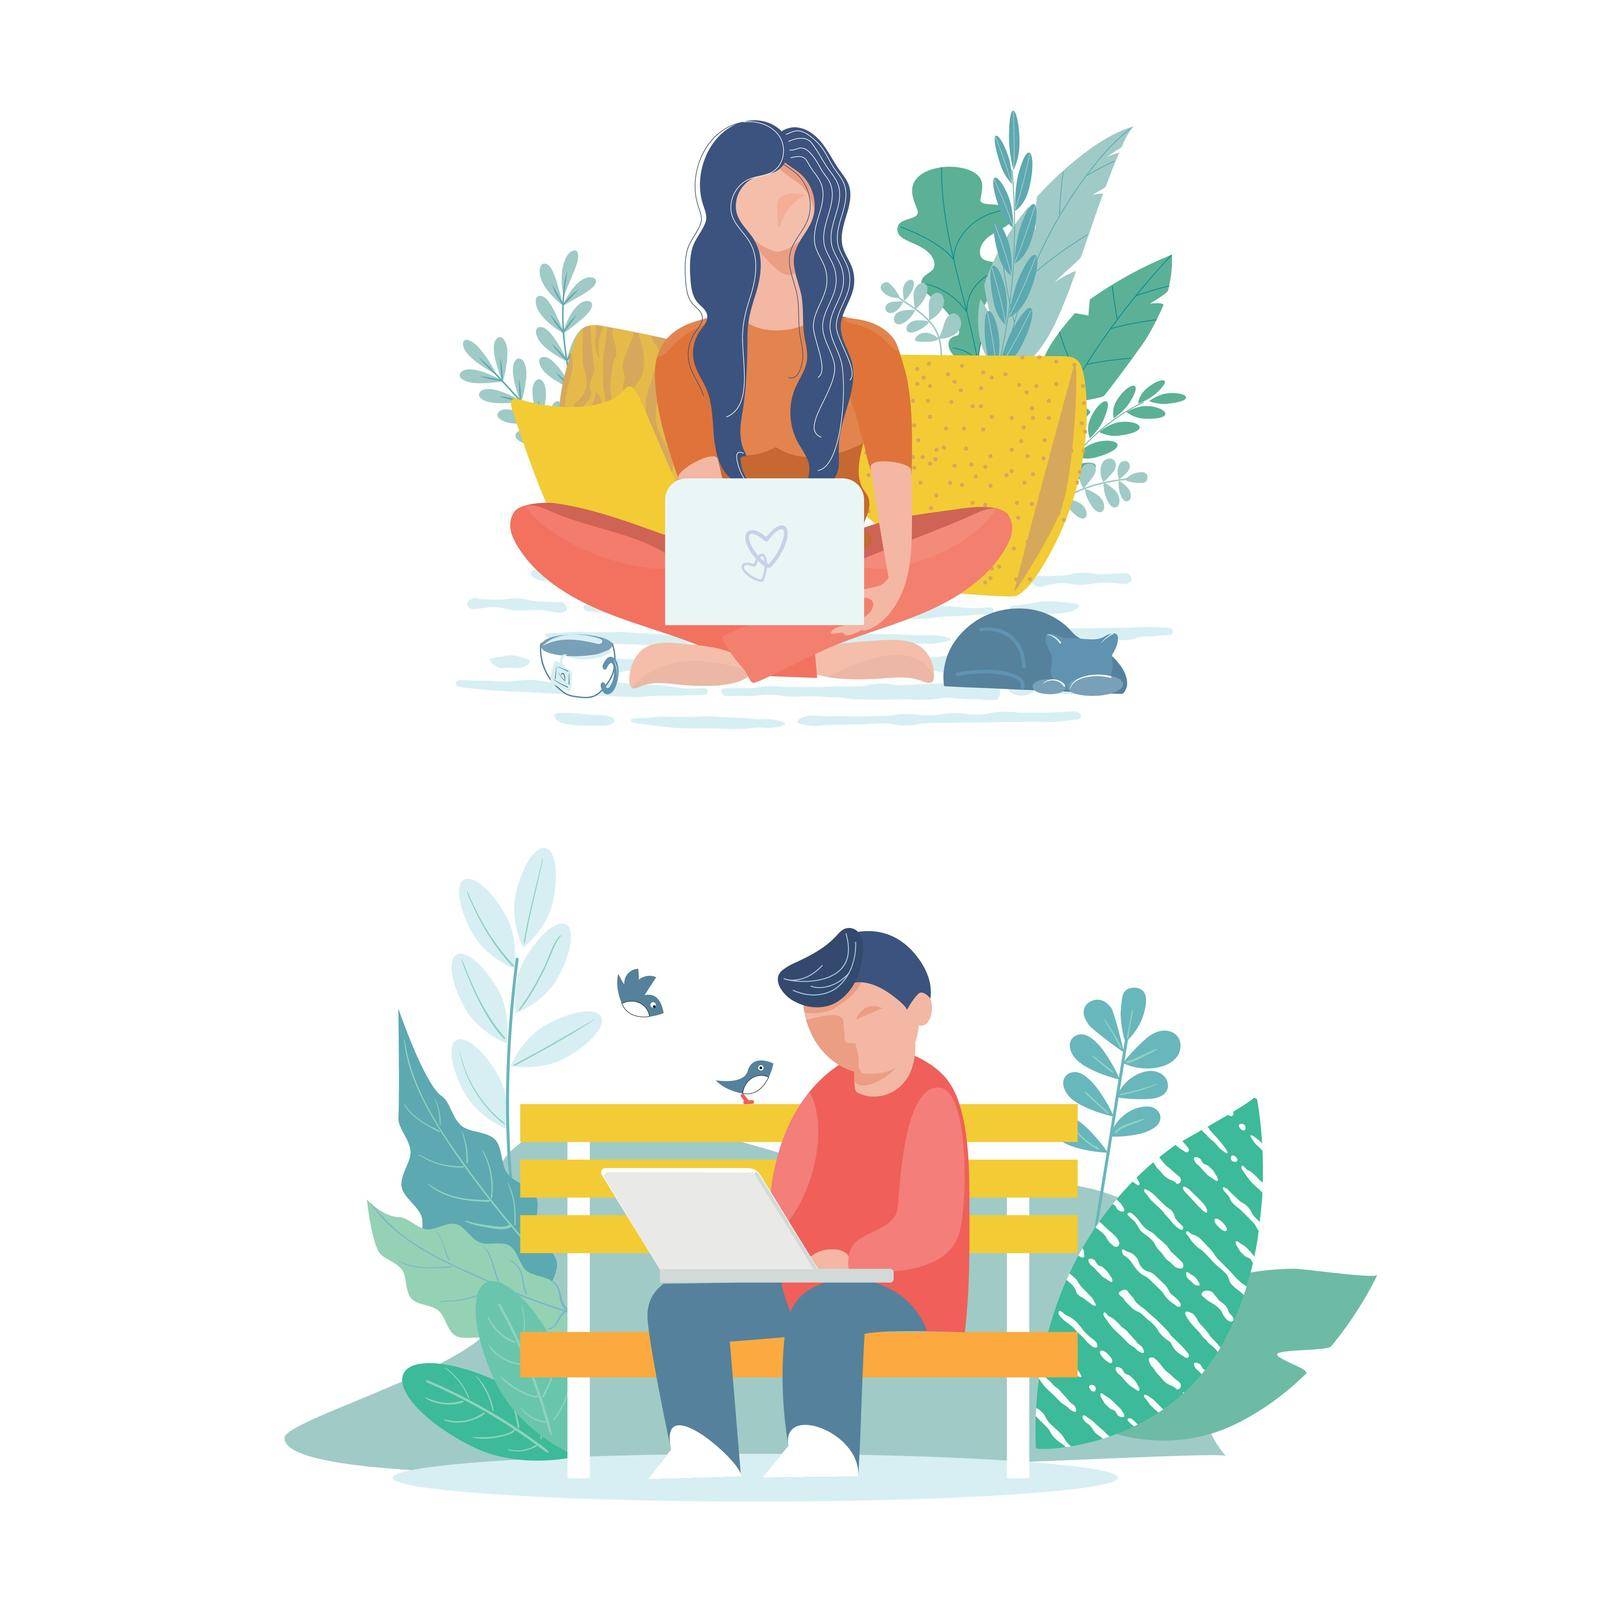 A girl with a laptop at home. A young man with a laptop on a bench in the park. Conceptual illustrations of remote work.